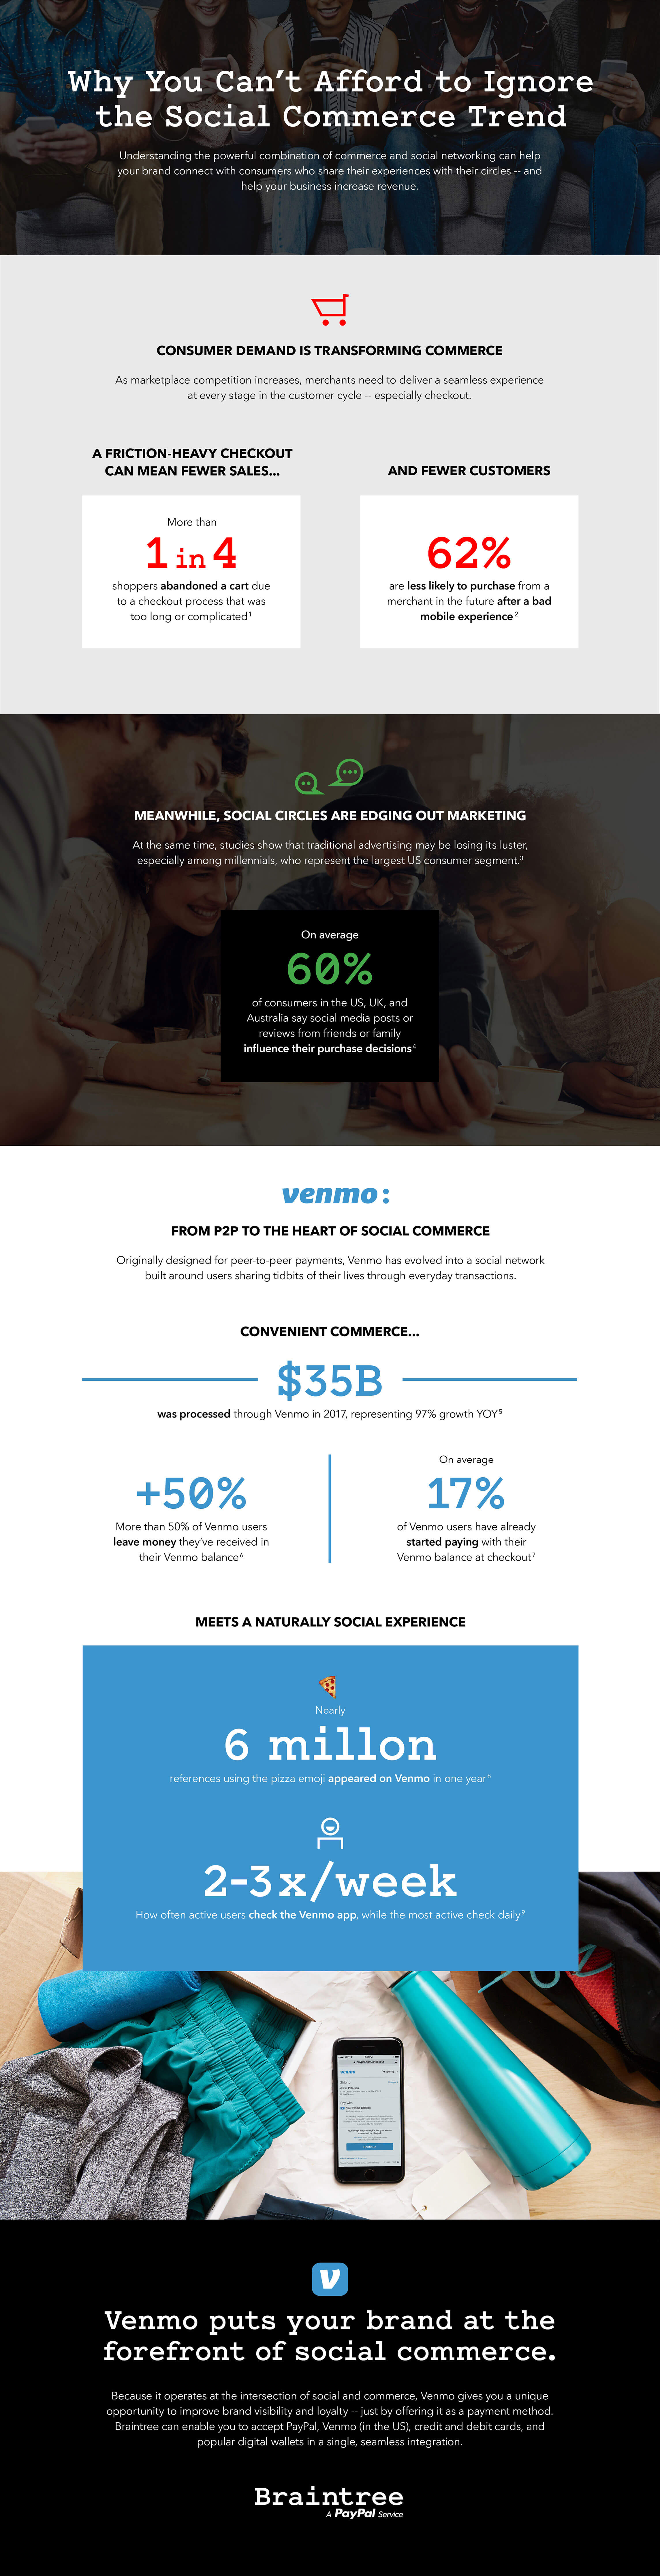 Social commerce infographic